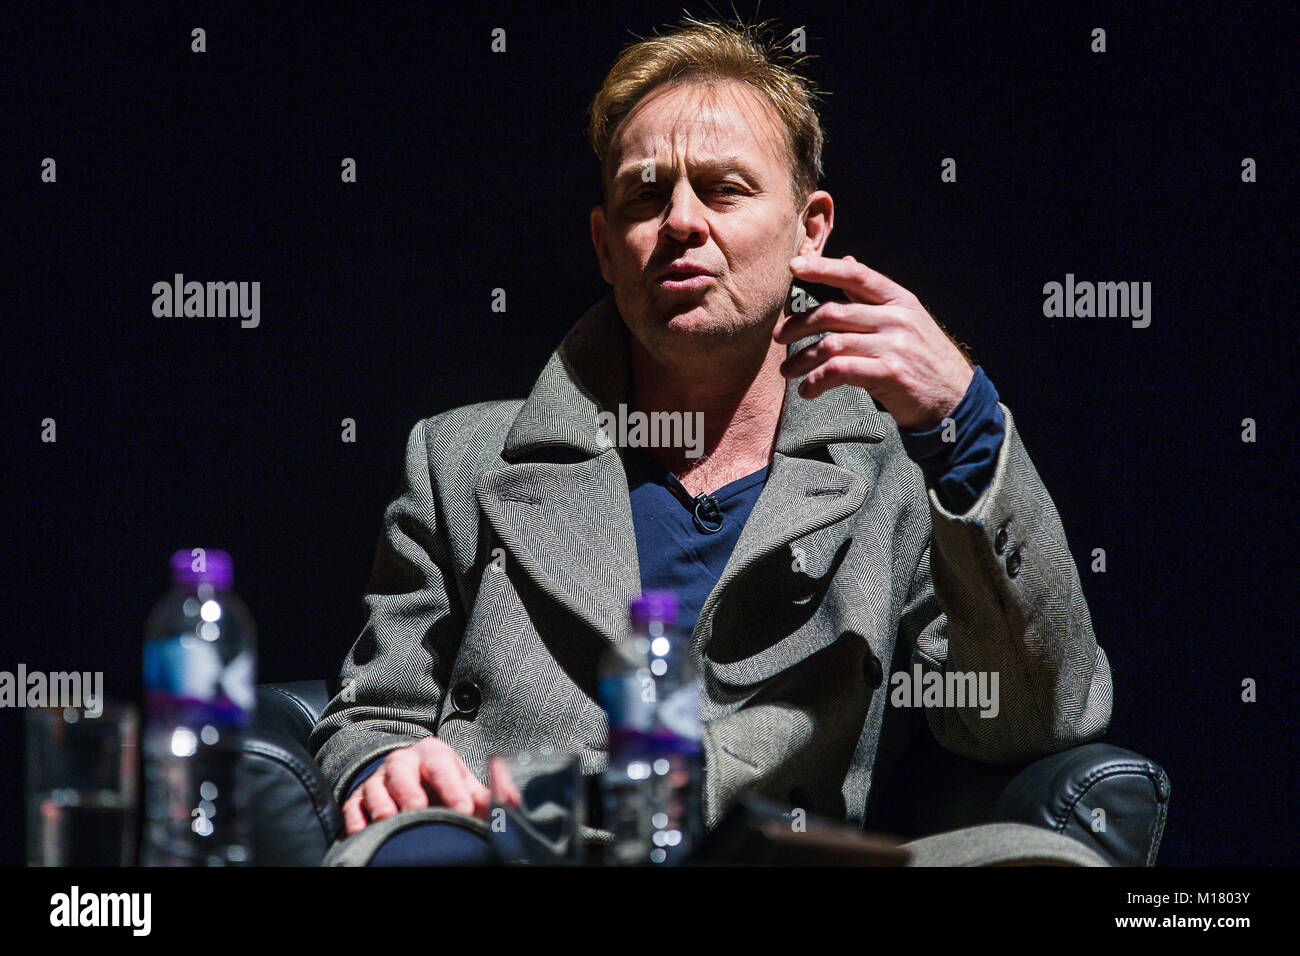 Bristol, UK. 28th January 2018. Jason Donovan talking about his time in The Rocky Horror Show 1n 1998 before a showing of the Rocky Horror Picture Show at The  Bristol Slapstick Festival 2018 at the Colston Hall Credit: David Betteridge/Alamy Live News Stock Photo